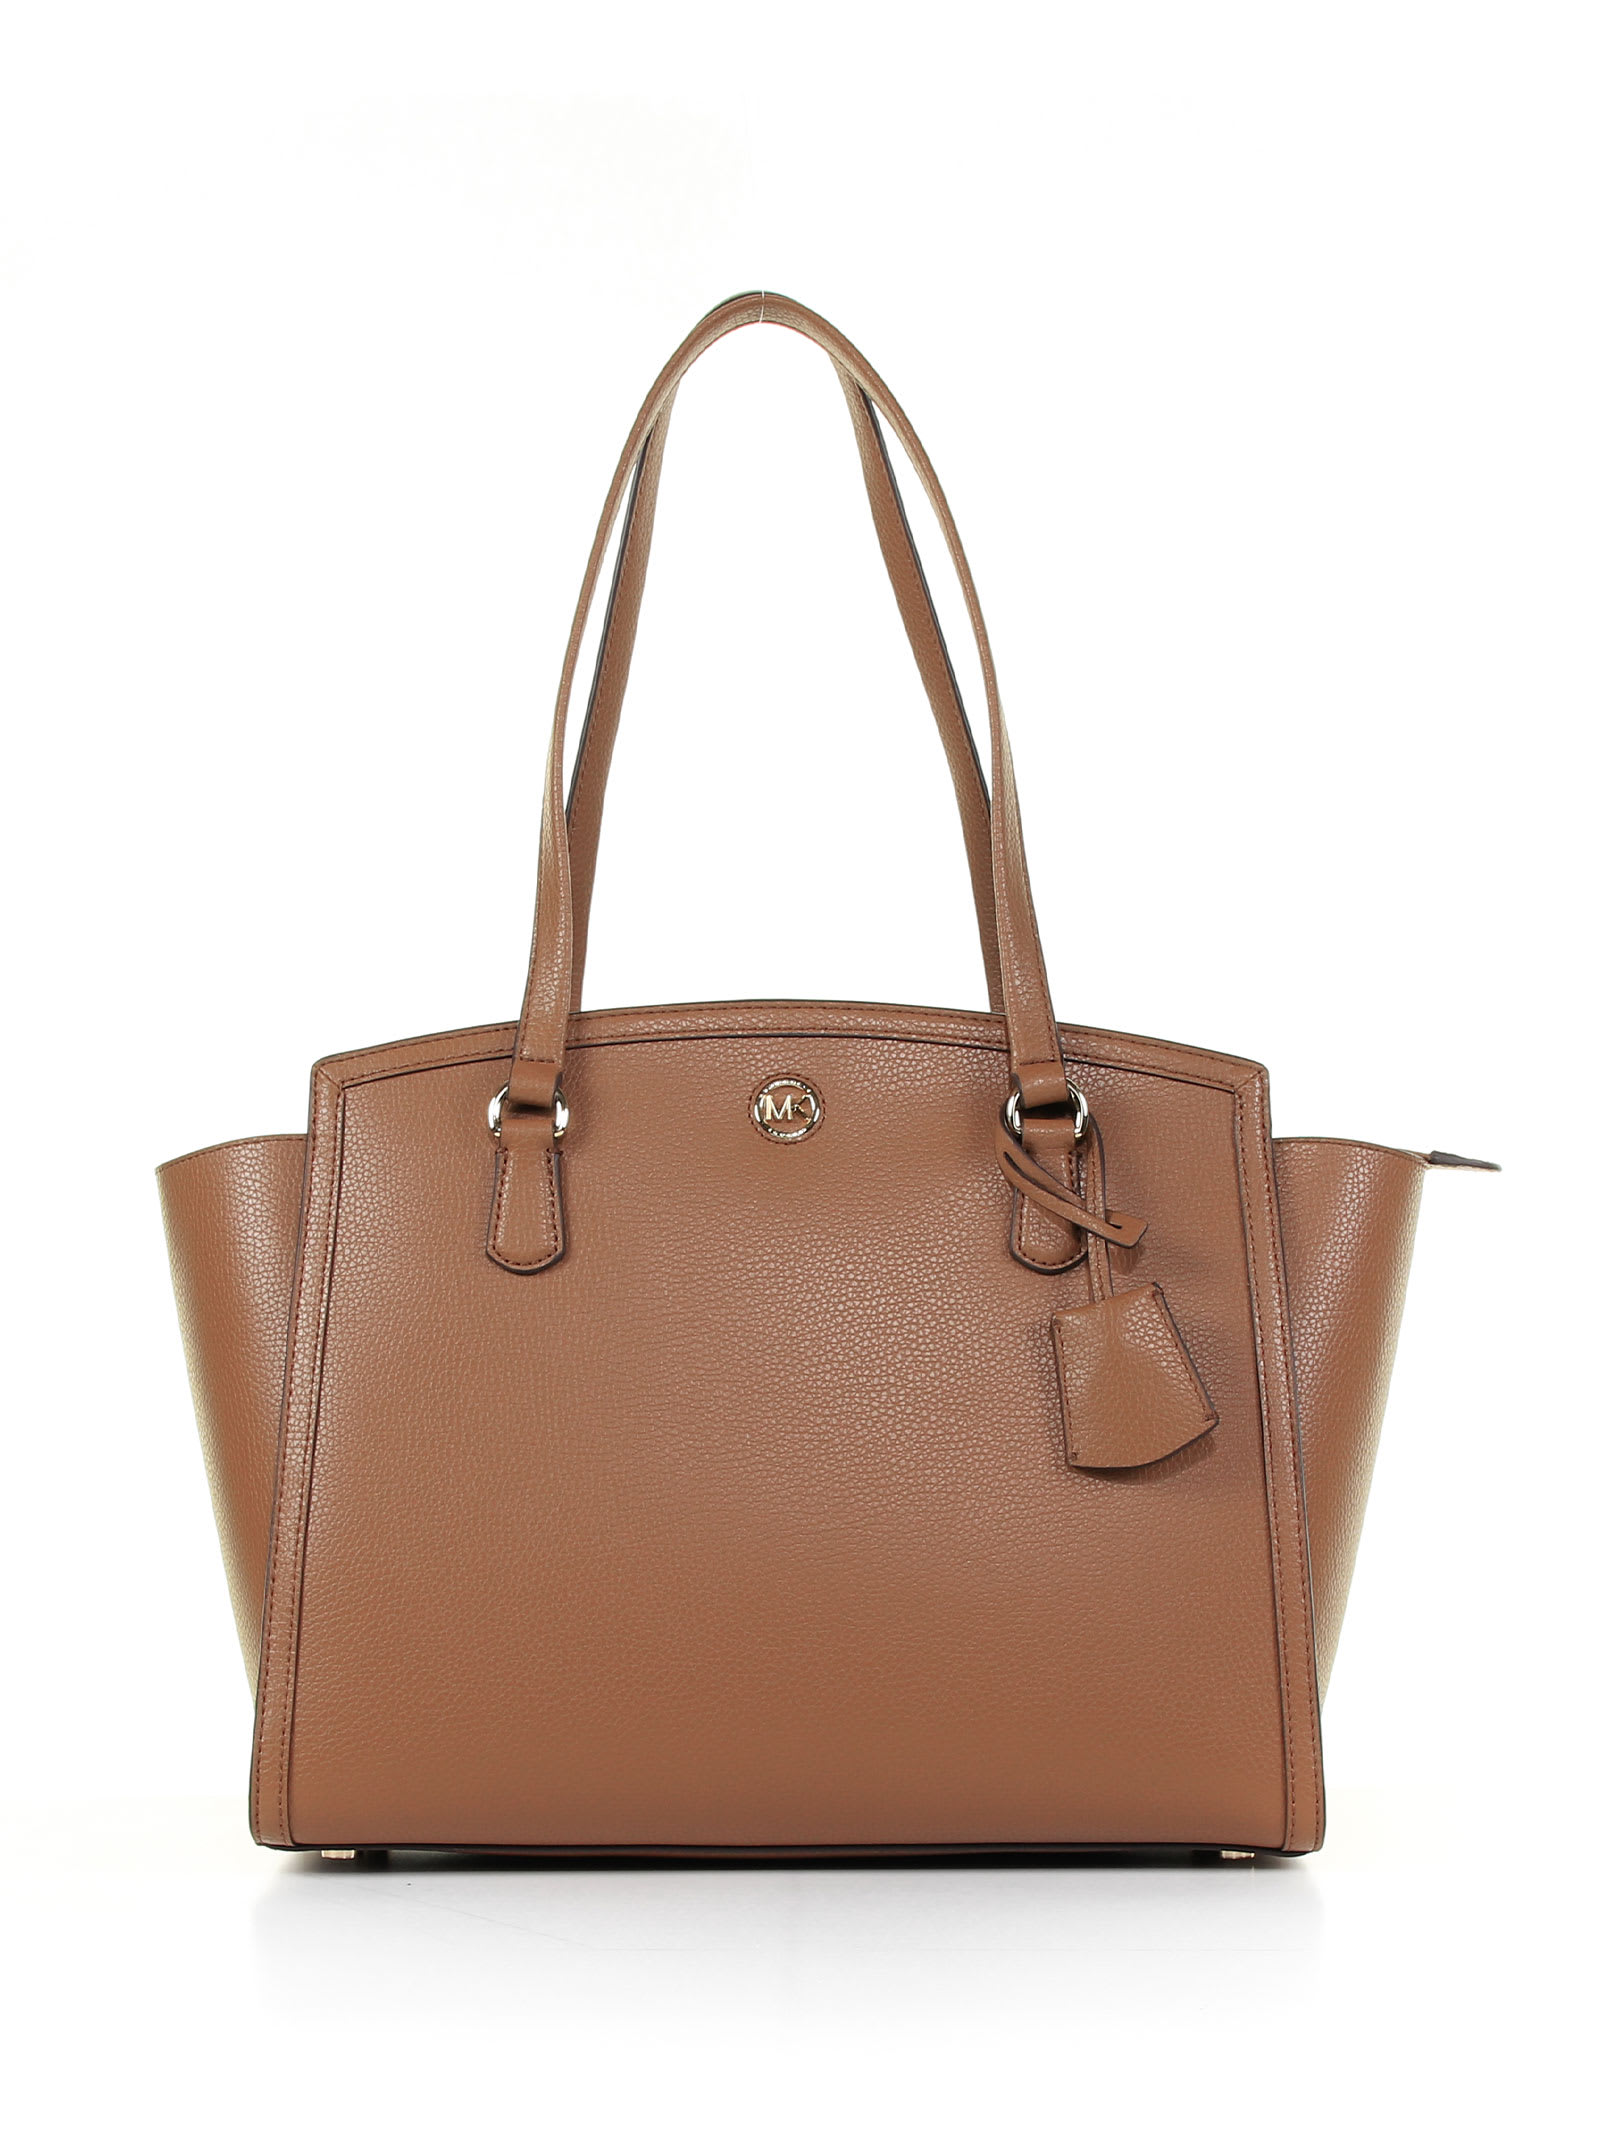 Michael Kors Chantal Tote Bag In Textured Leather